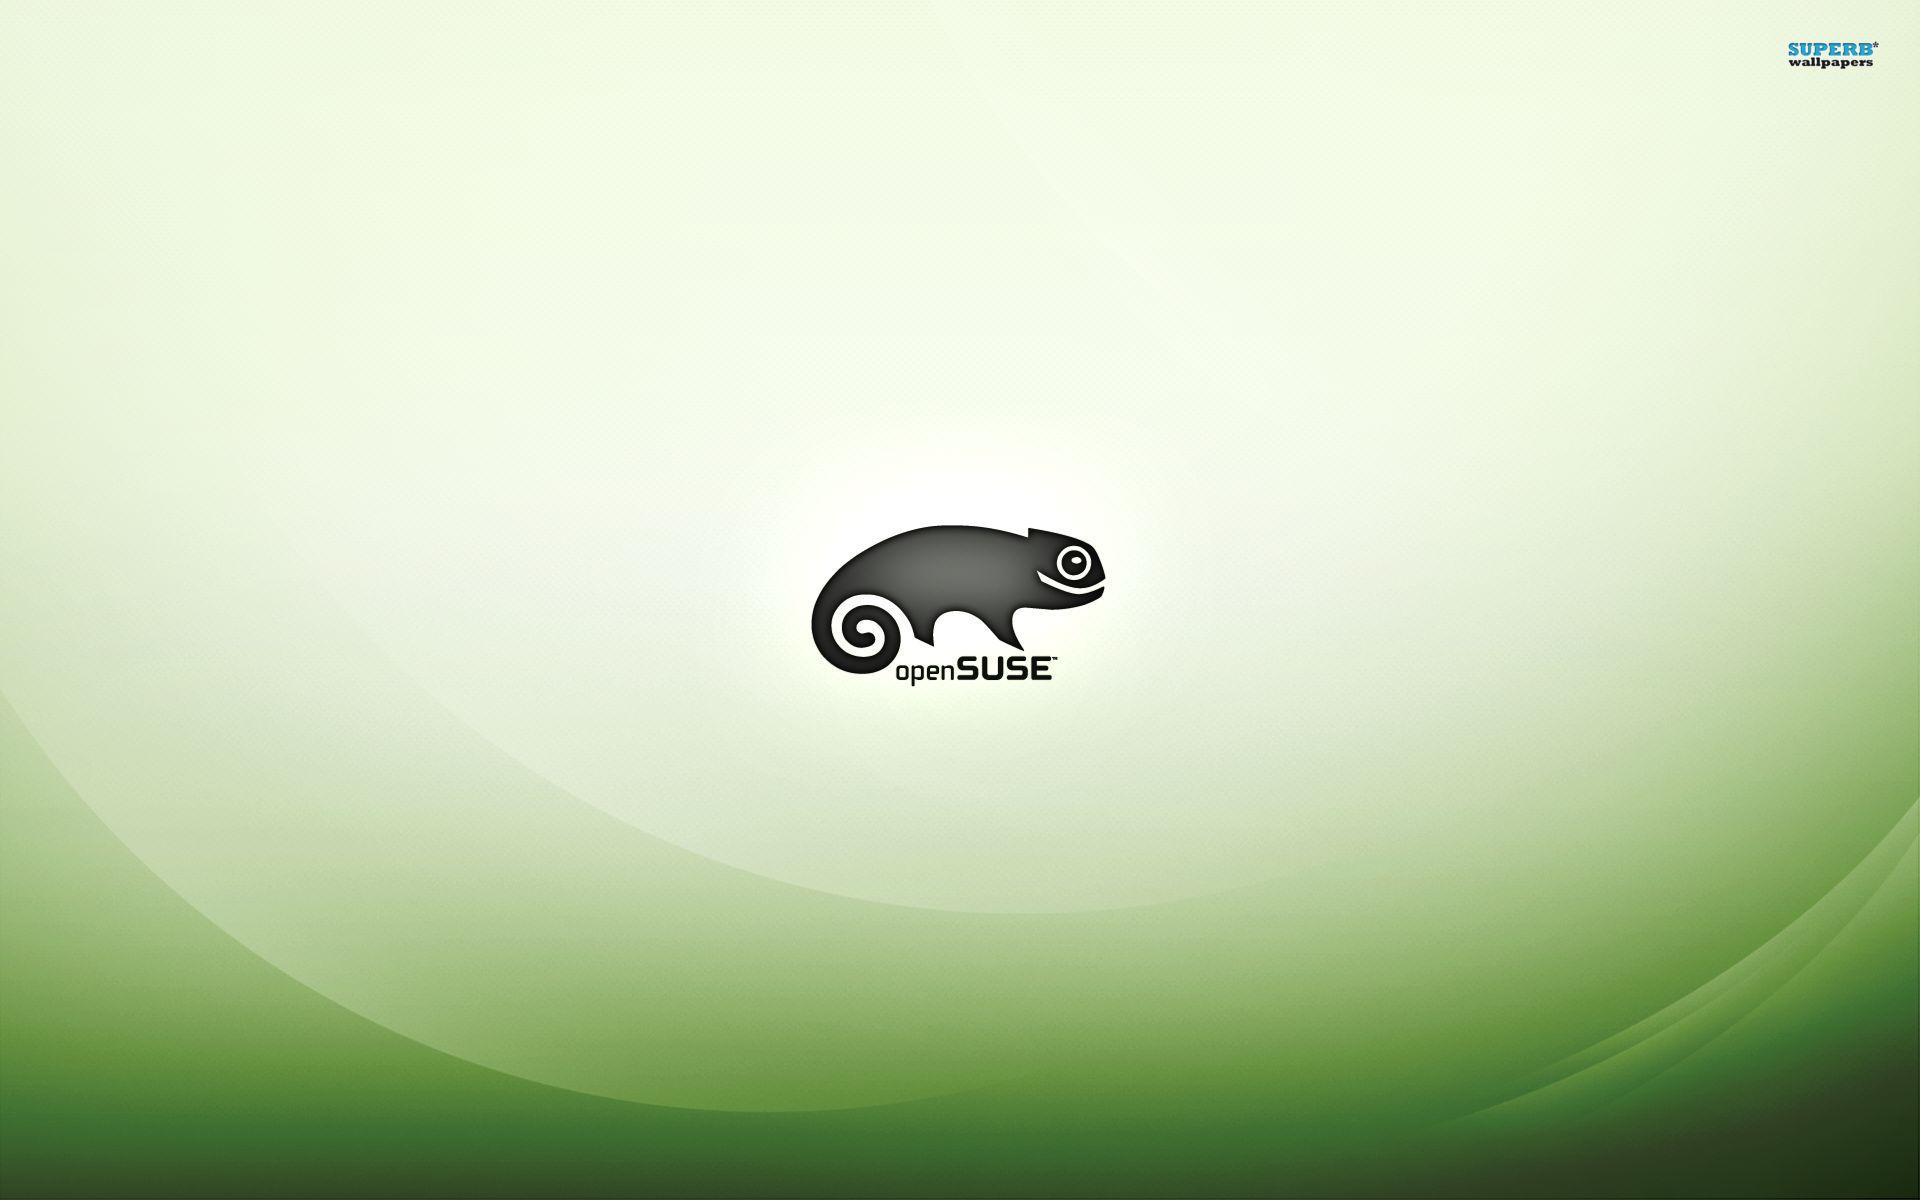 openSUSE wallpaper - Computer wallpapers - #7500